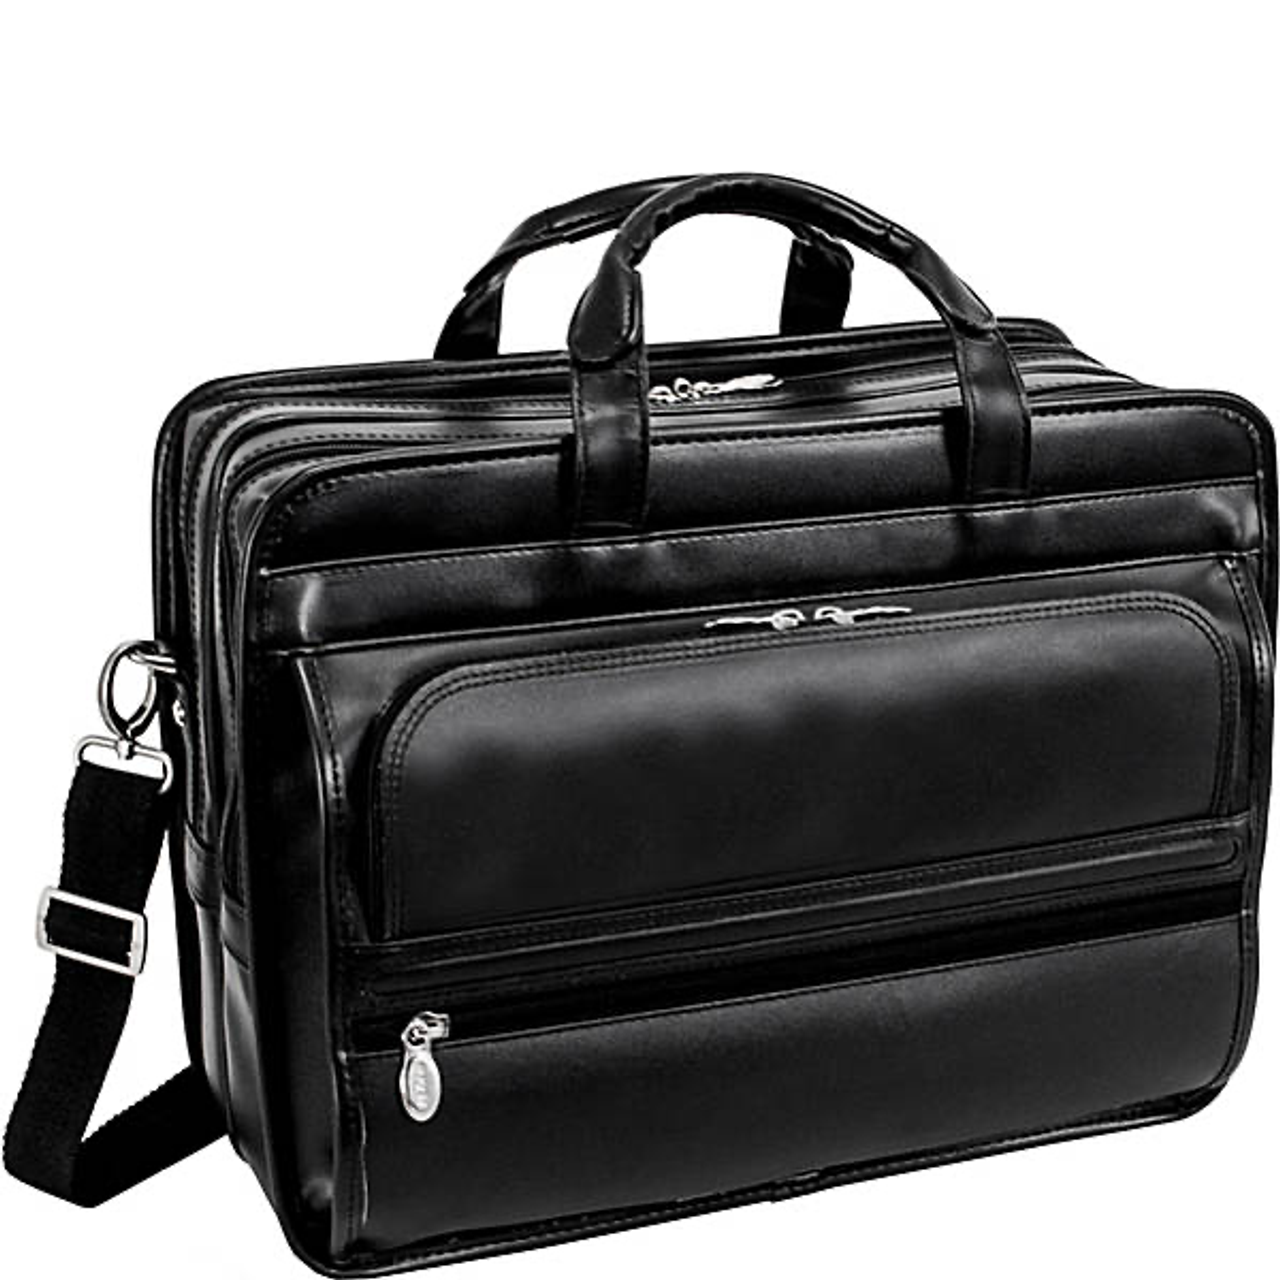 Franklin Covey Faux Leather Rolling Briefcase Carry On Travel Laptop Bag  Black